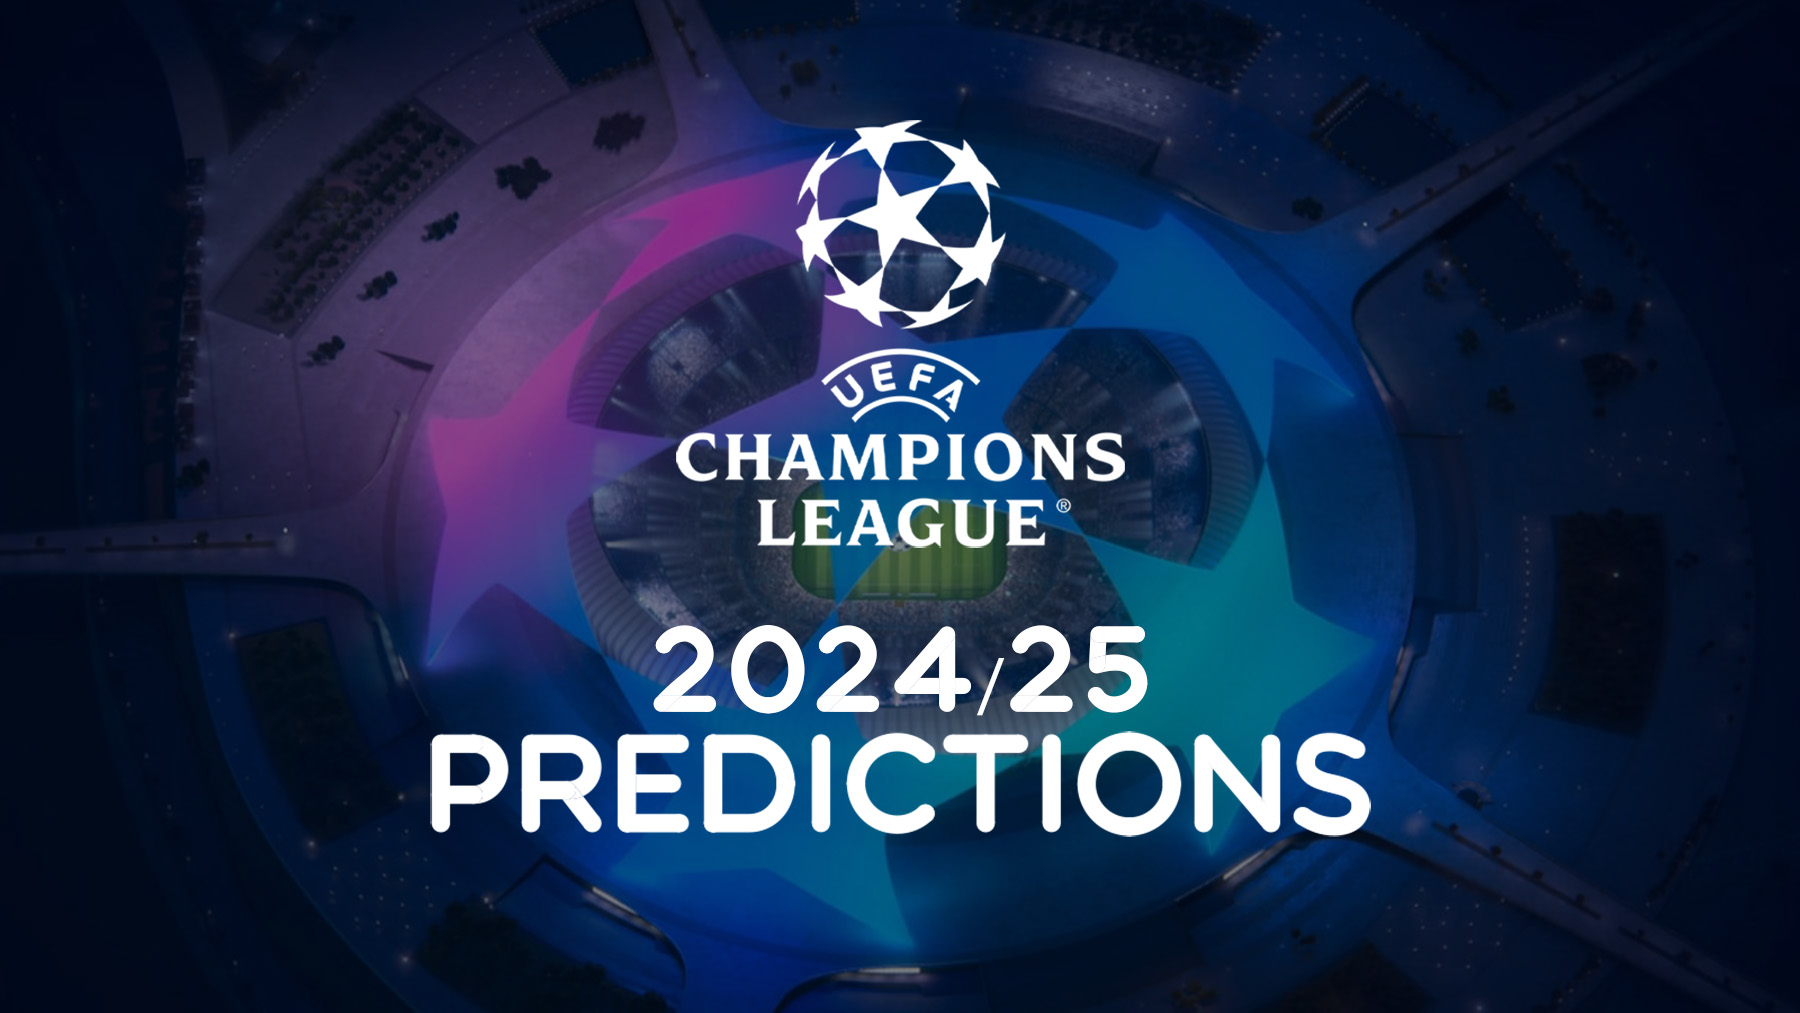 UEFA Champions League 24/25 predictions voting poll.